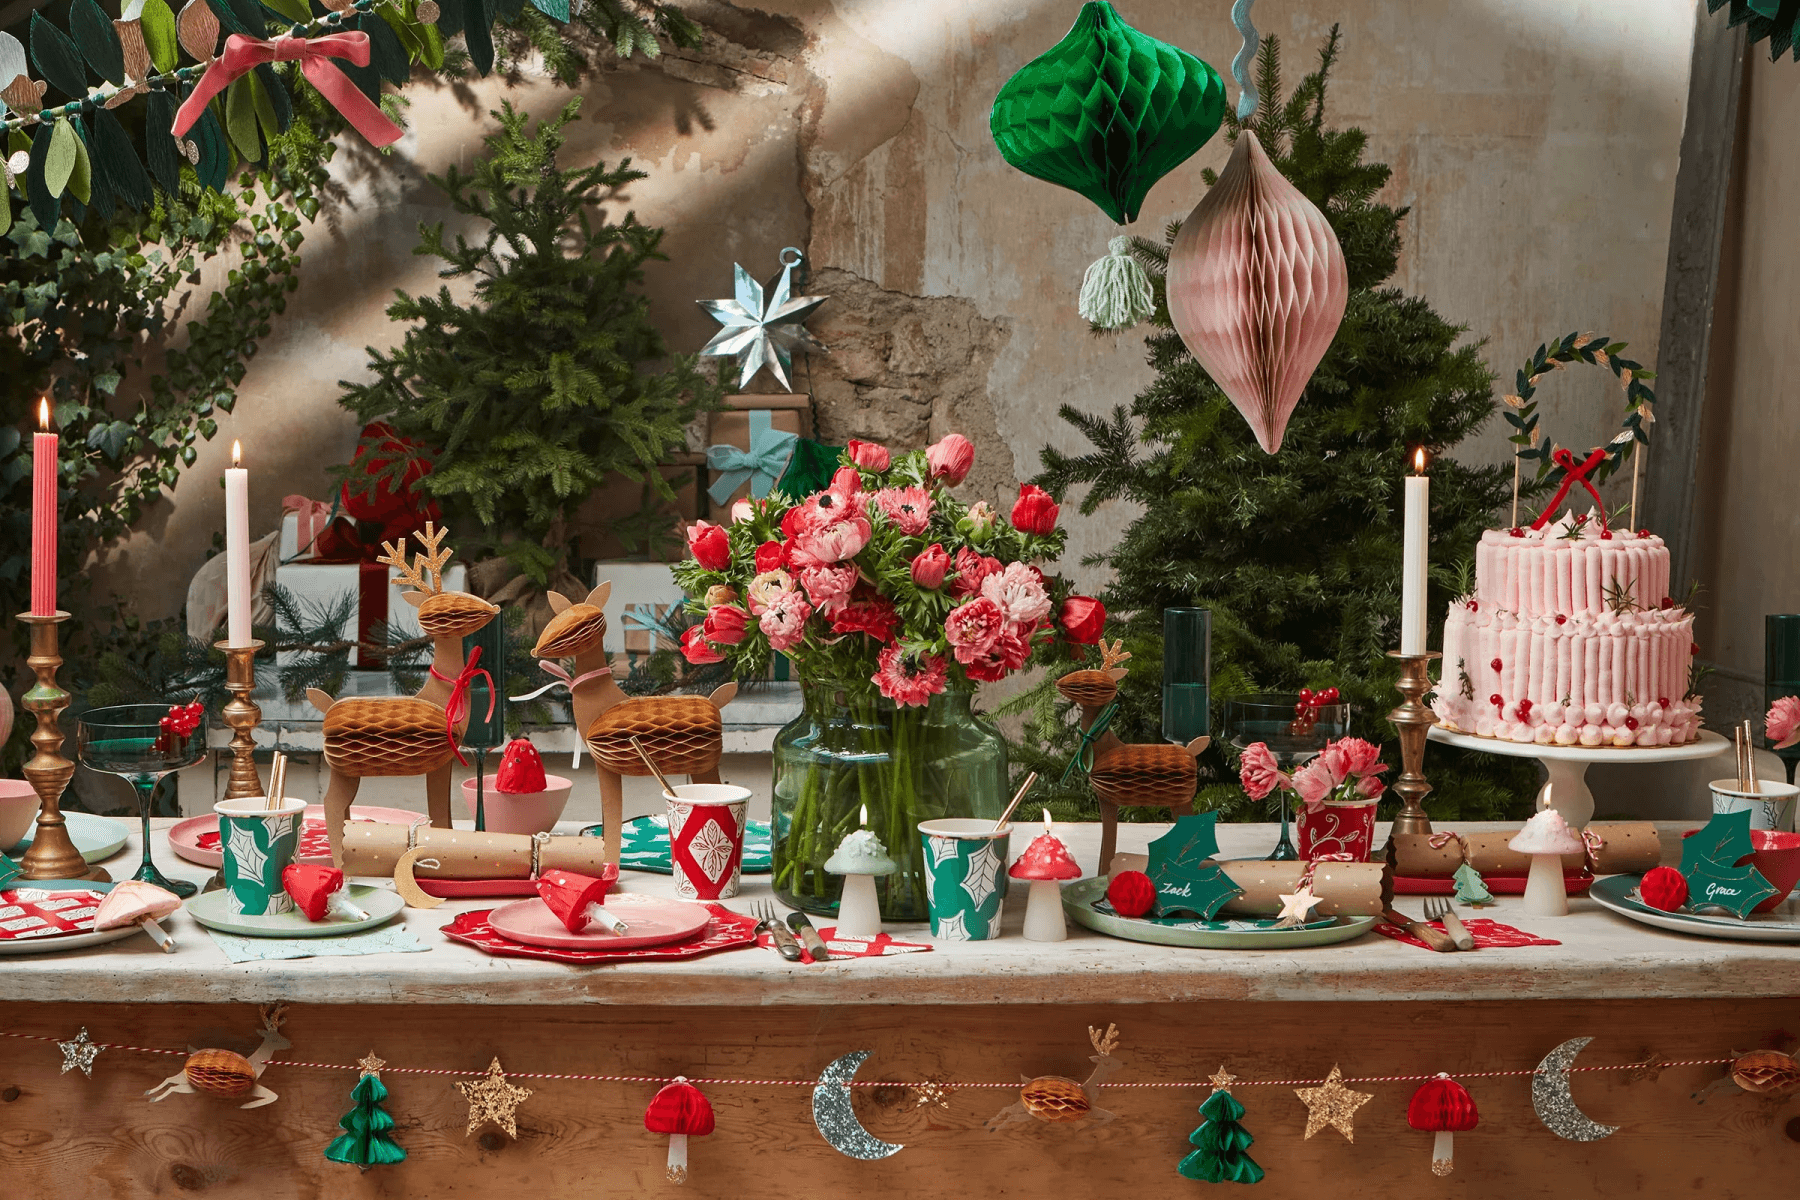 How to Host a Holiday Party at Home – Decorations & Activities